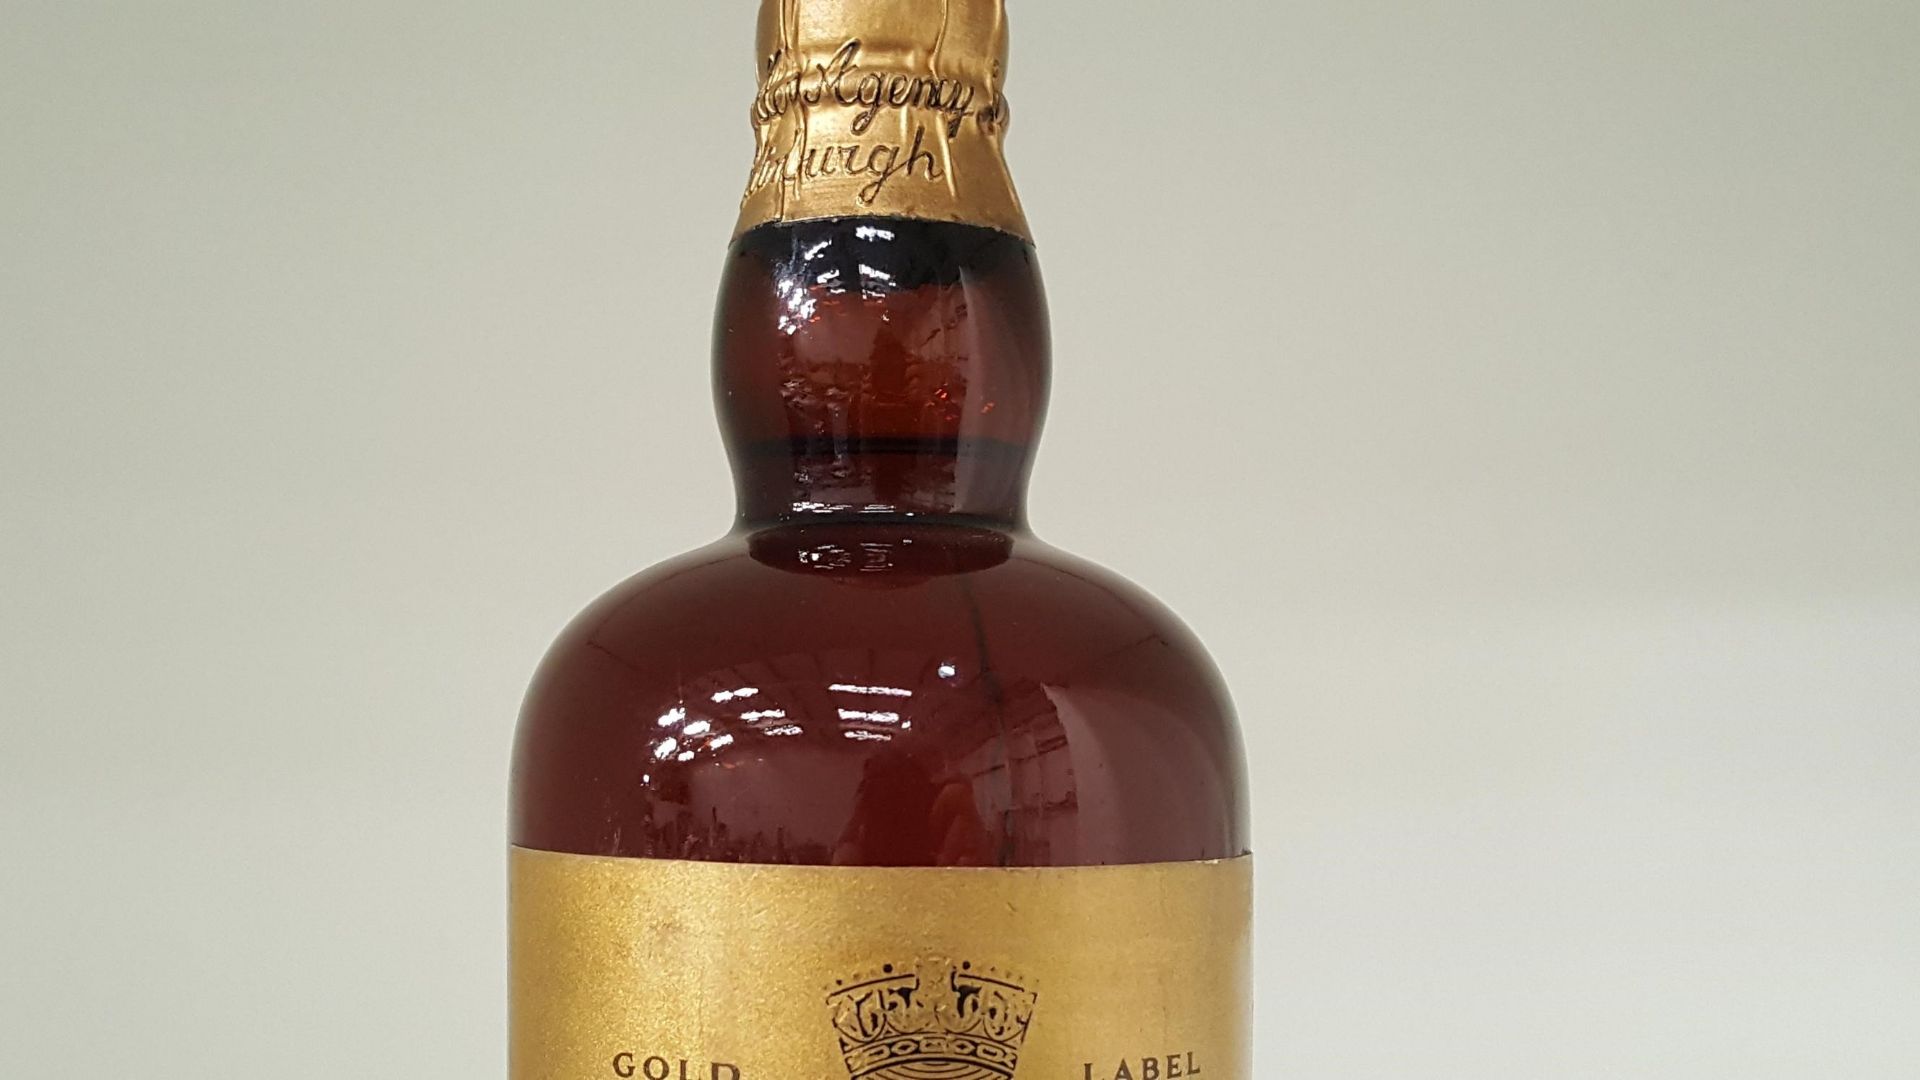 A bottle of King George IV Extra Special Gold Label Old Scotch Whisky 70% proof, Approx. 75cl - Image 5 of 9